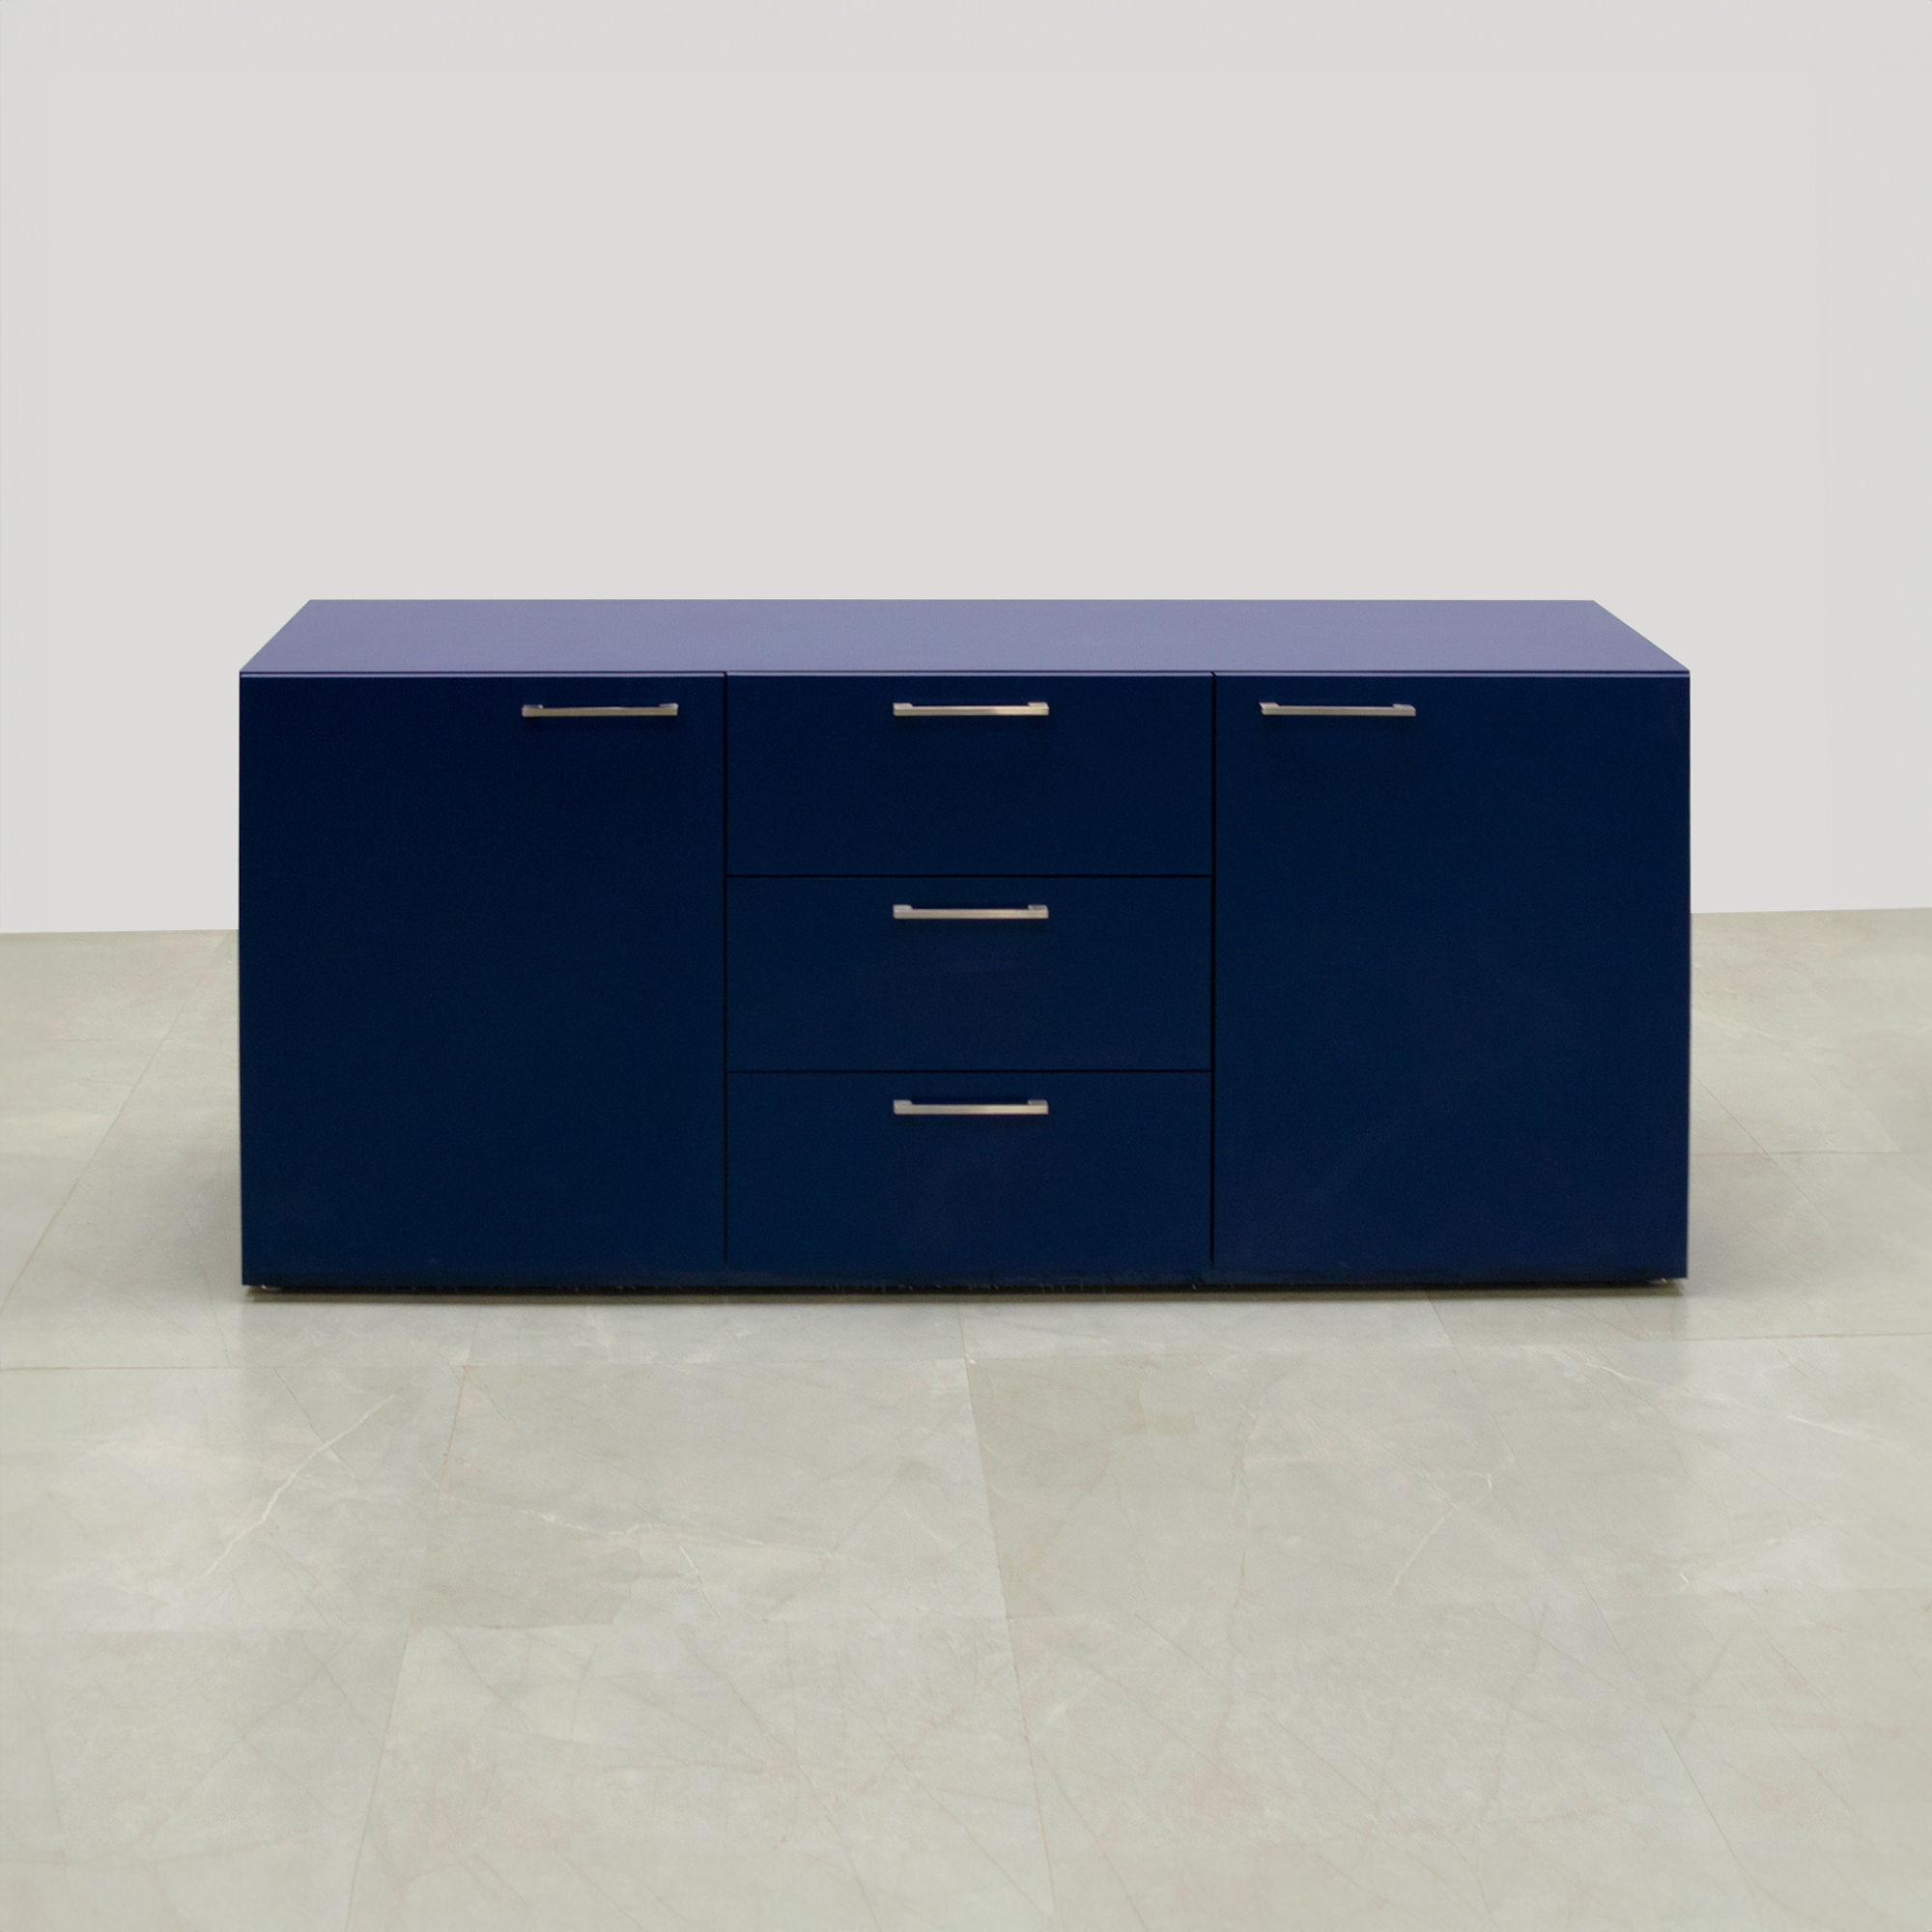 72-inch Naples Custom Storage Credenza in navy blue matte laminate credenza and front drawers & doors, shown here.